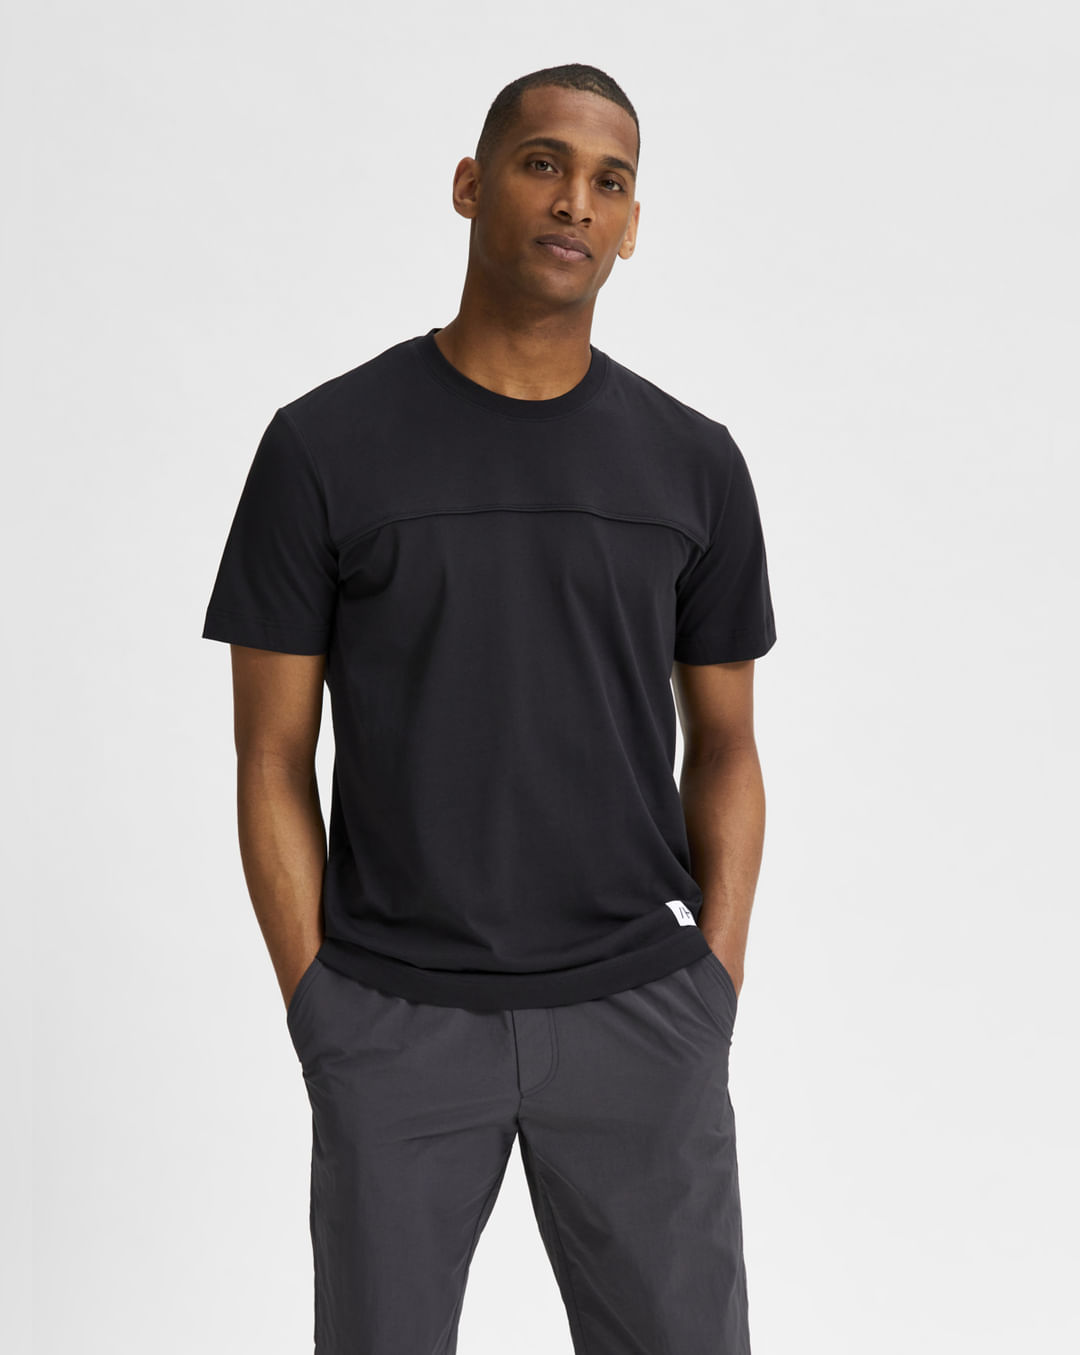 Buy Black Organic Cotton Crew Neck T-shirt for Men at SELECTED HOMME  |156508301